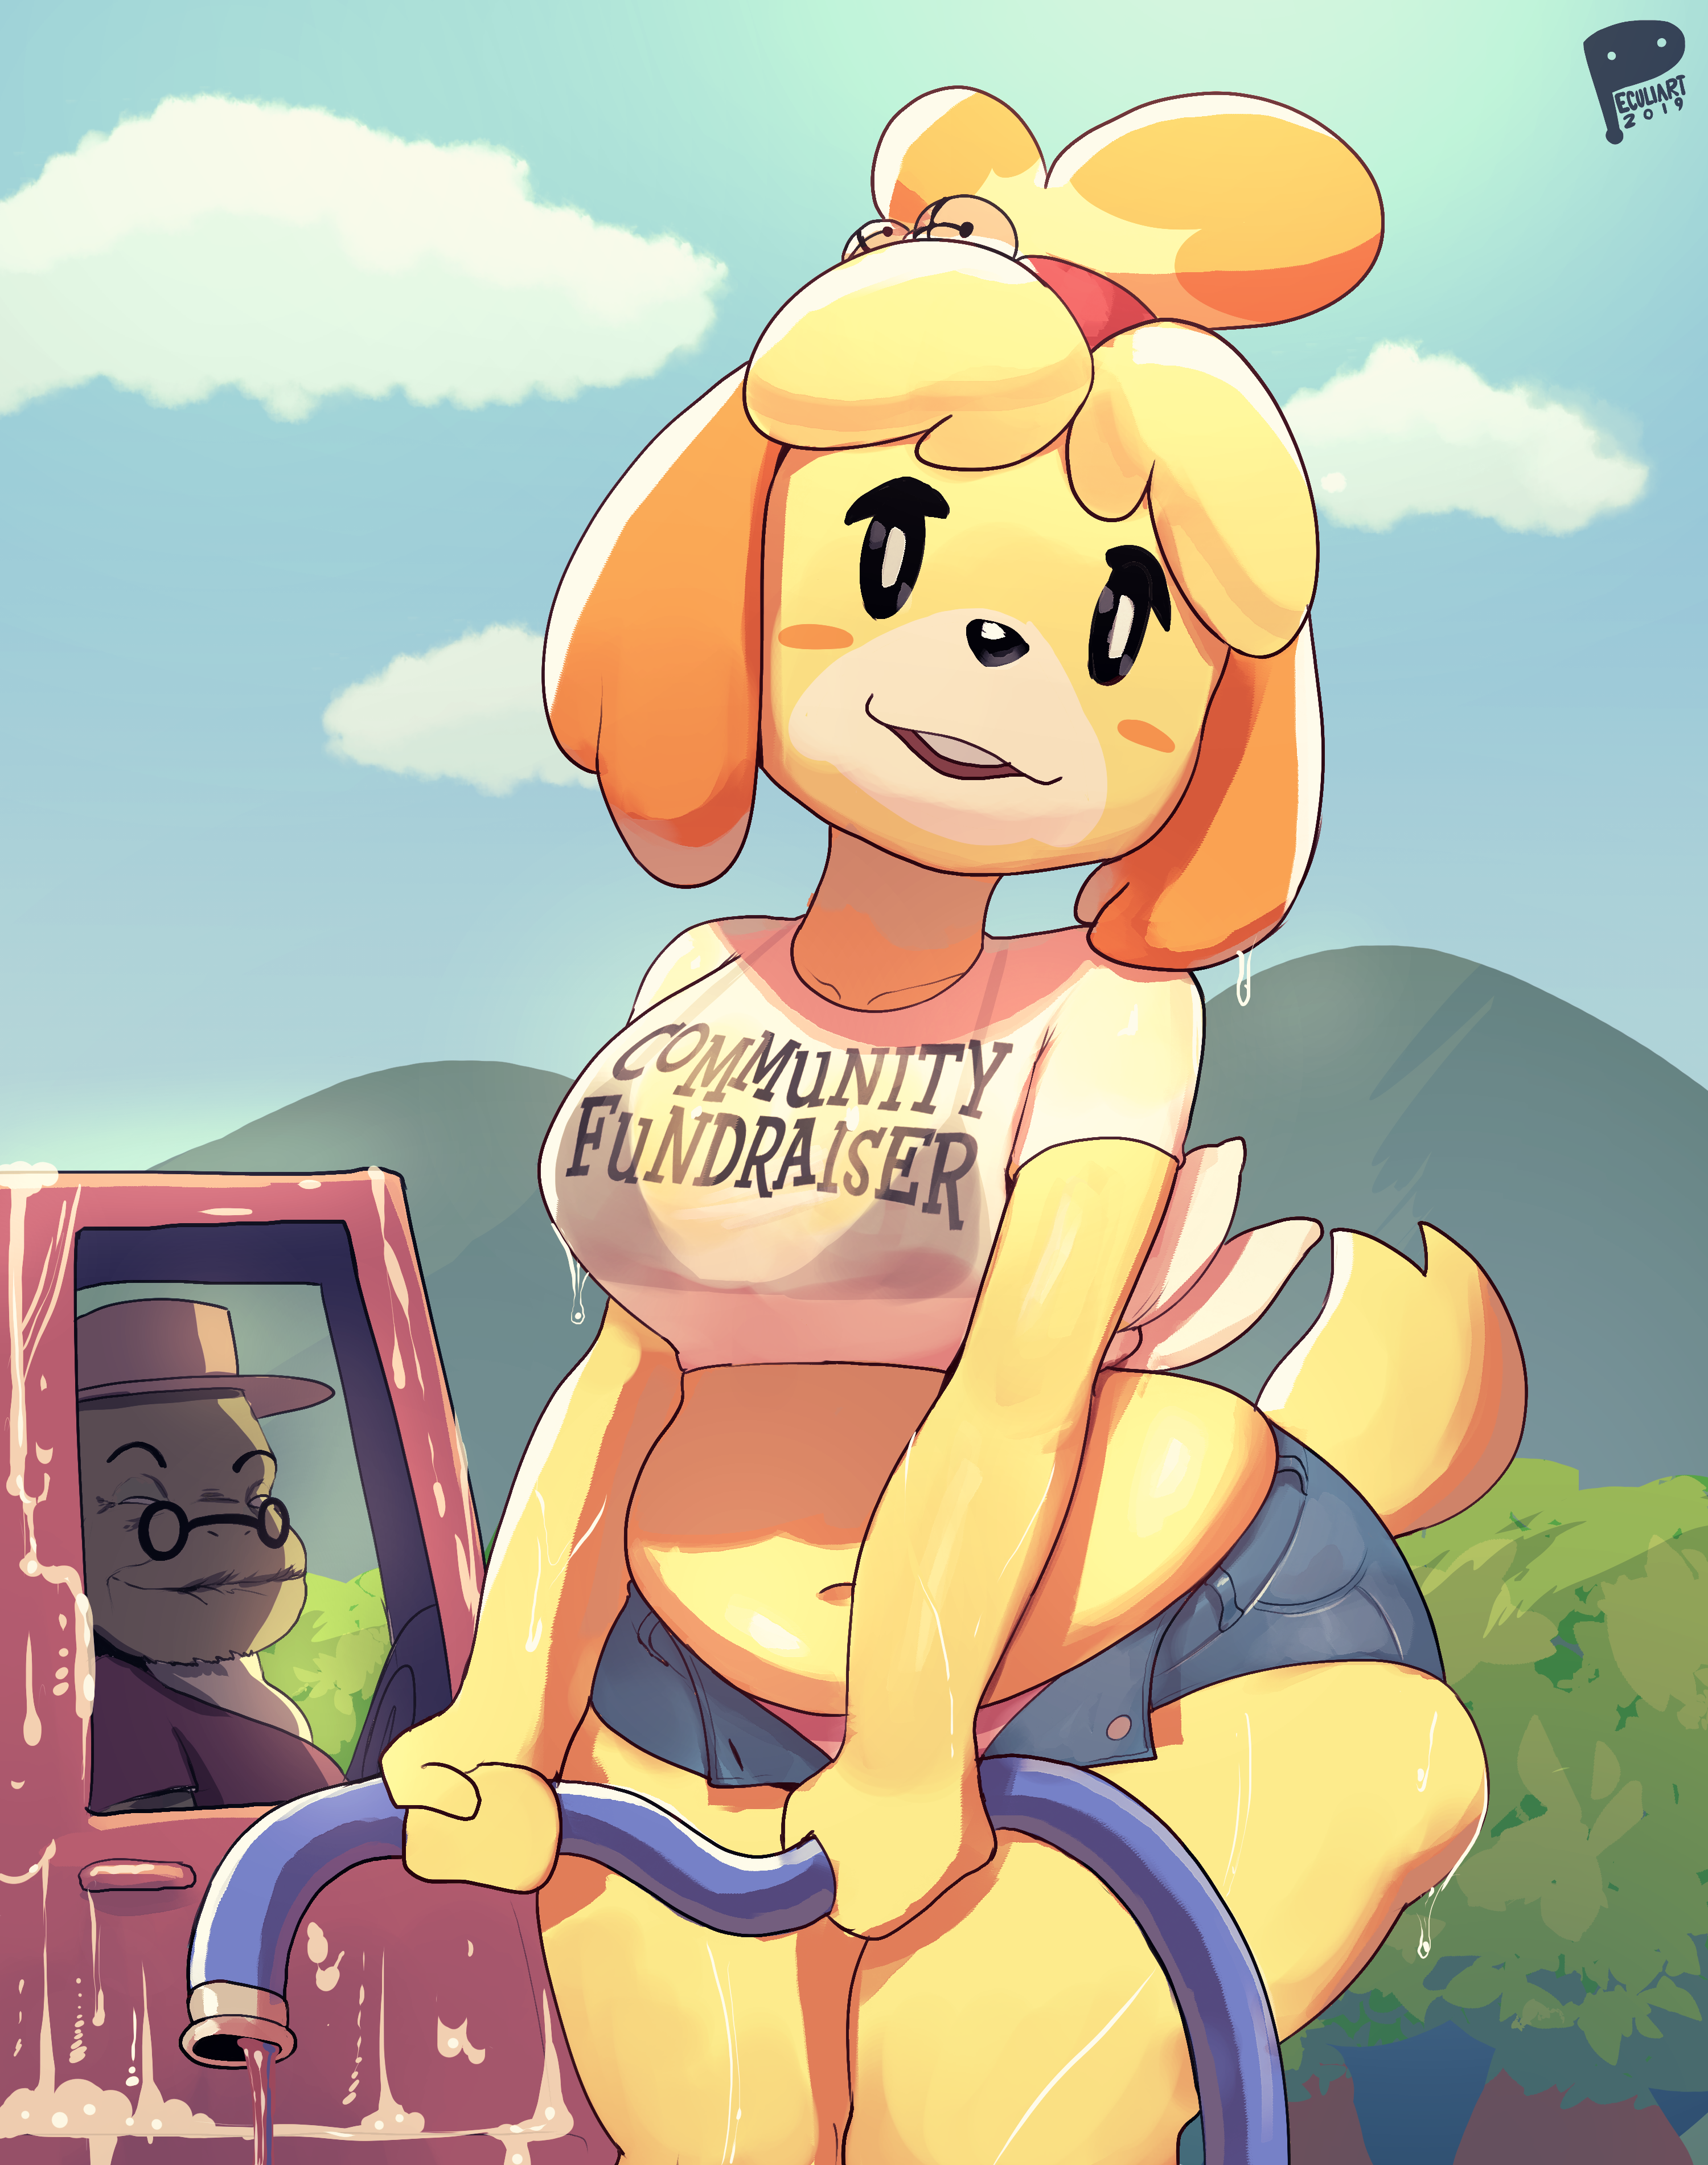 isabelle from animal crossing animal crossing furry drawing animals.